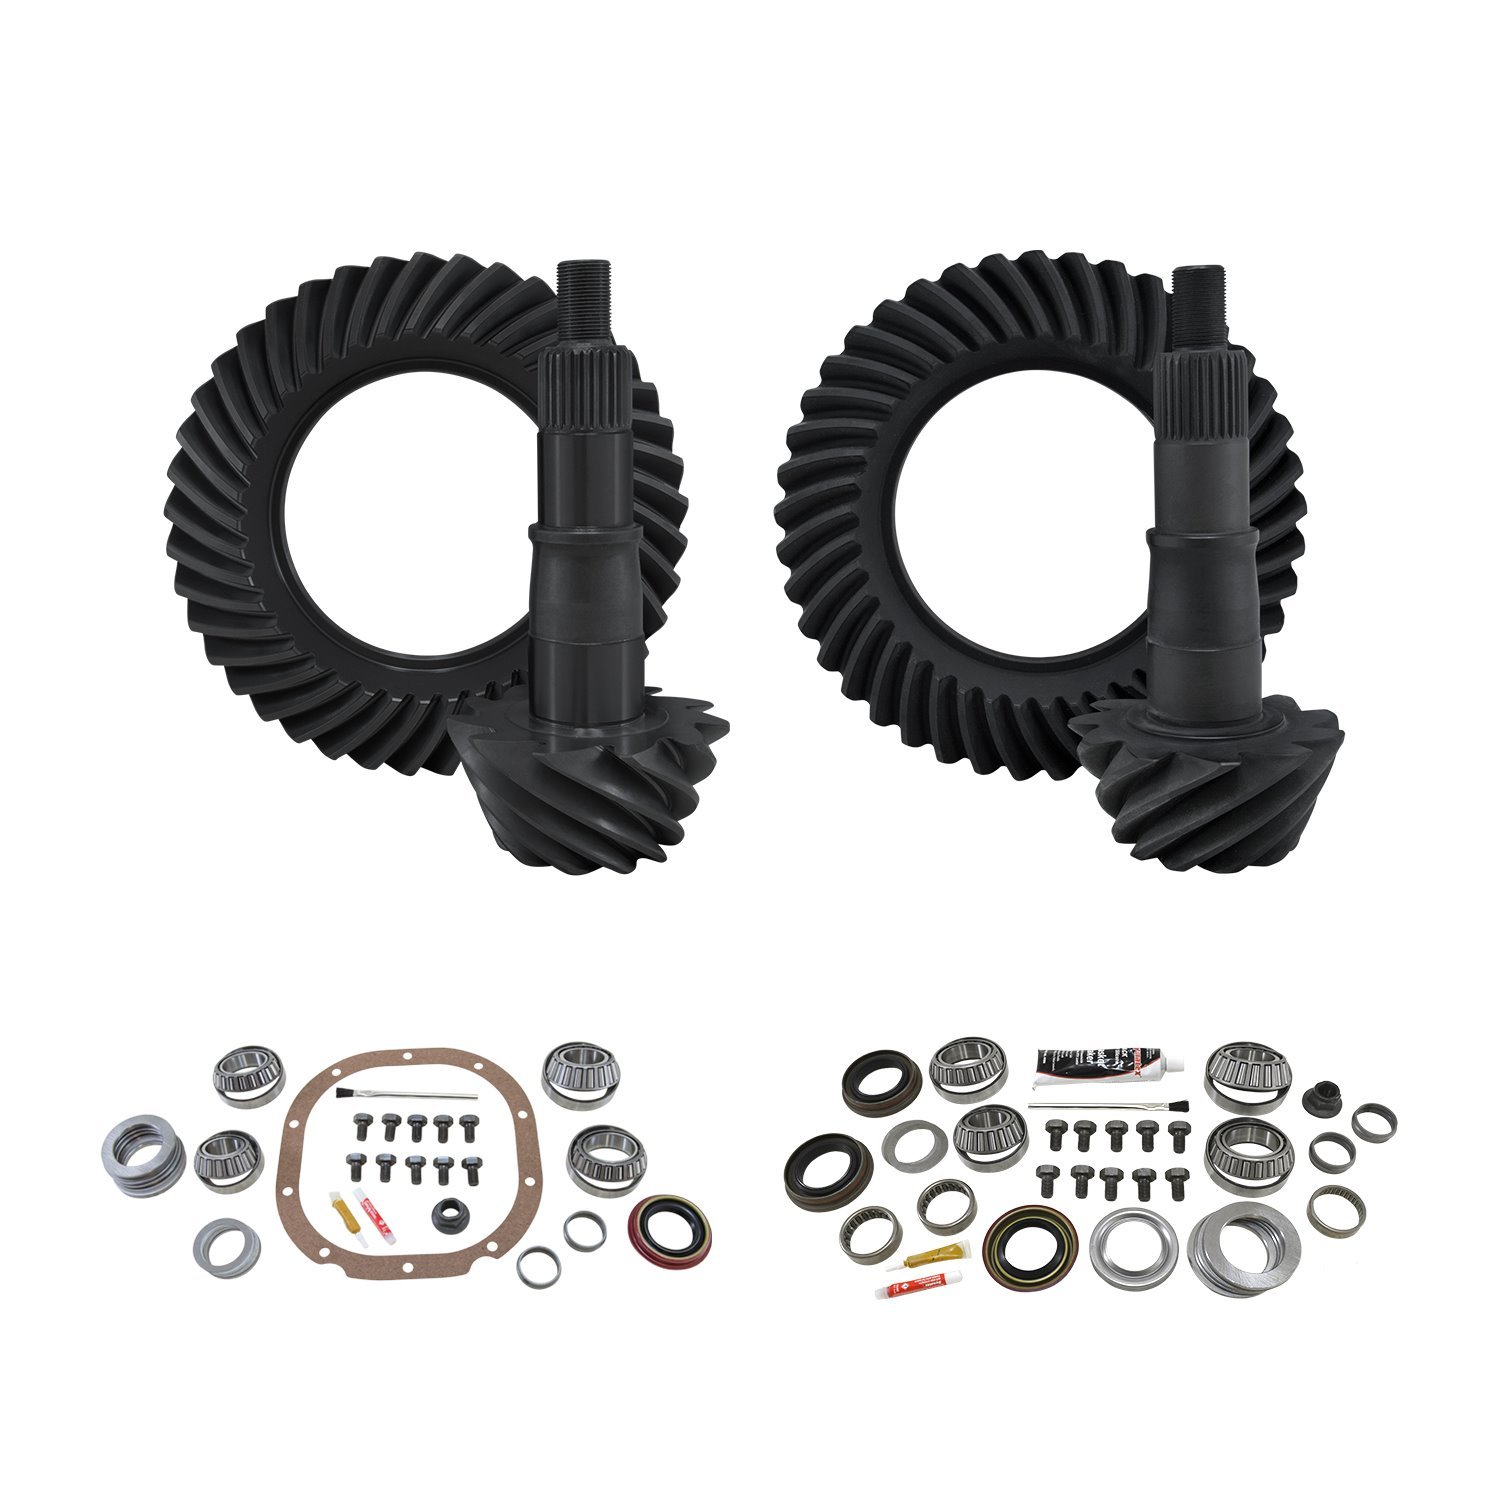 Re-Gear & Installation Kit, Ford 8.8 in., 2000-2008 F150, 4.56 Ratio, Fr&Rr